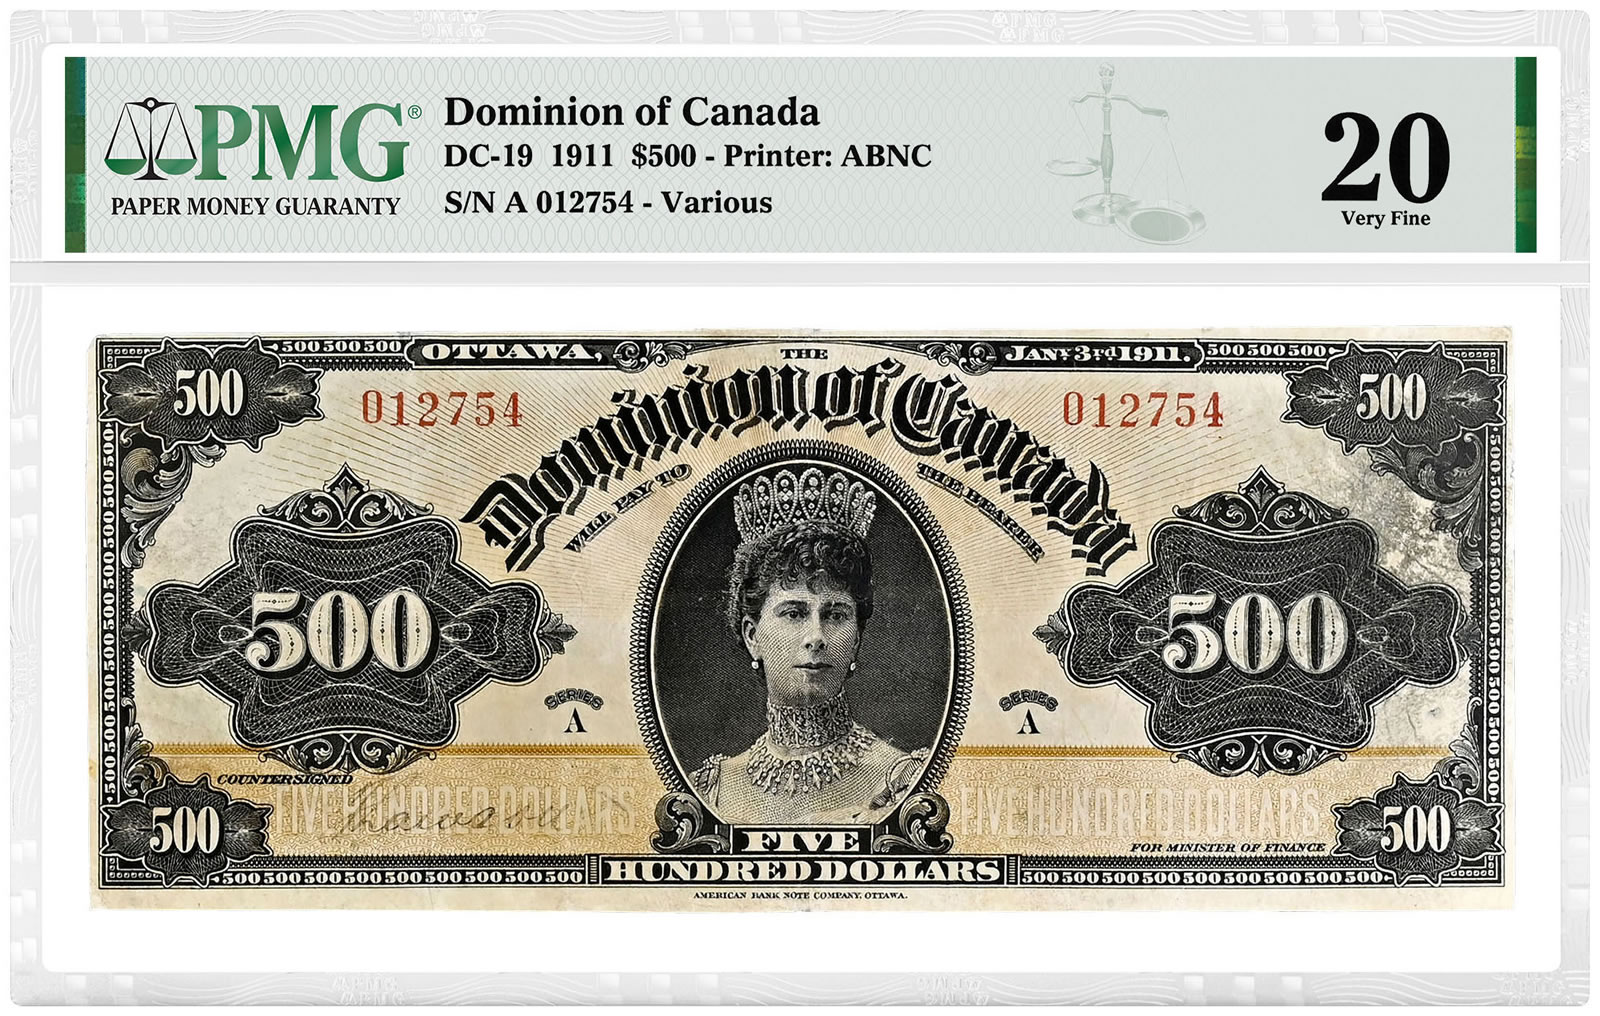 PMG Certifies Incredibly Rare Canadian 1911 $500 Banknote | CoinNews